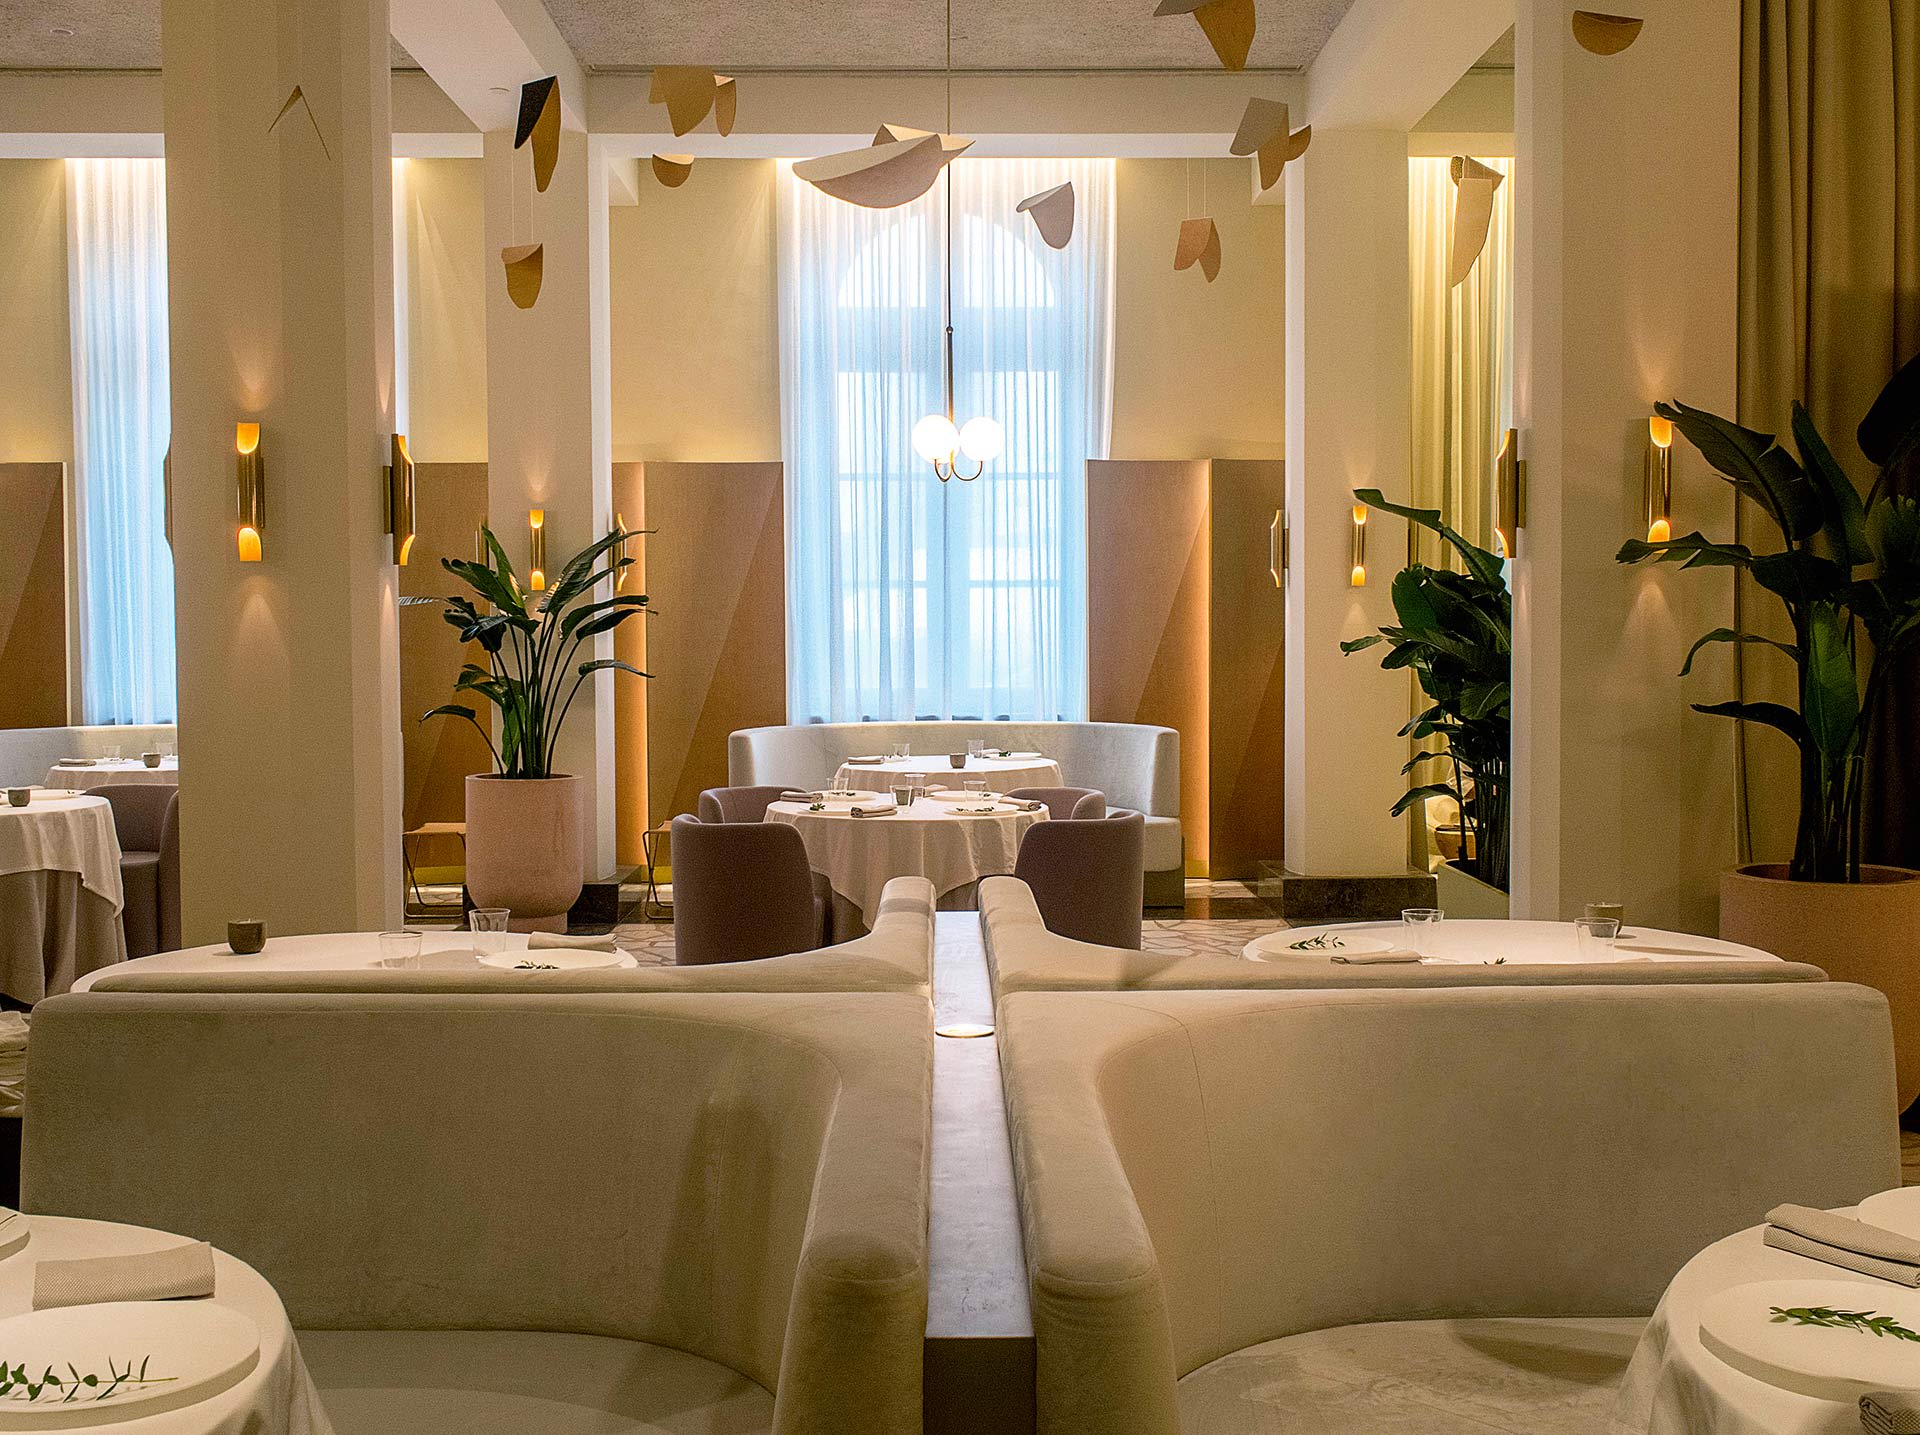 Odette Restaurant — The Place At Which To Splash Your Year-End Bonus